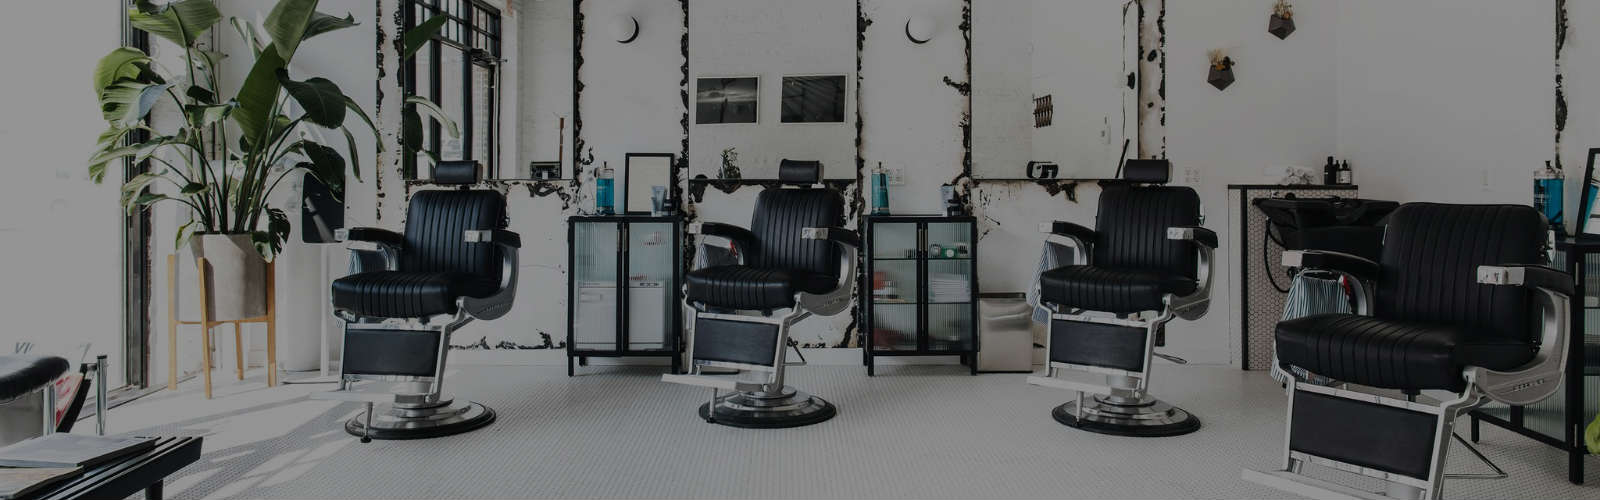 Blind Barber | Blind Barber Grooming | The Grooming Clinic